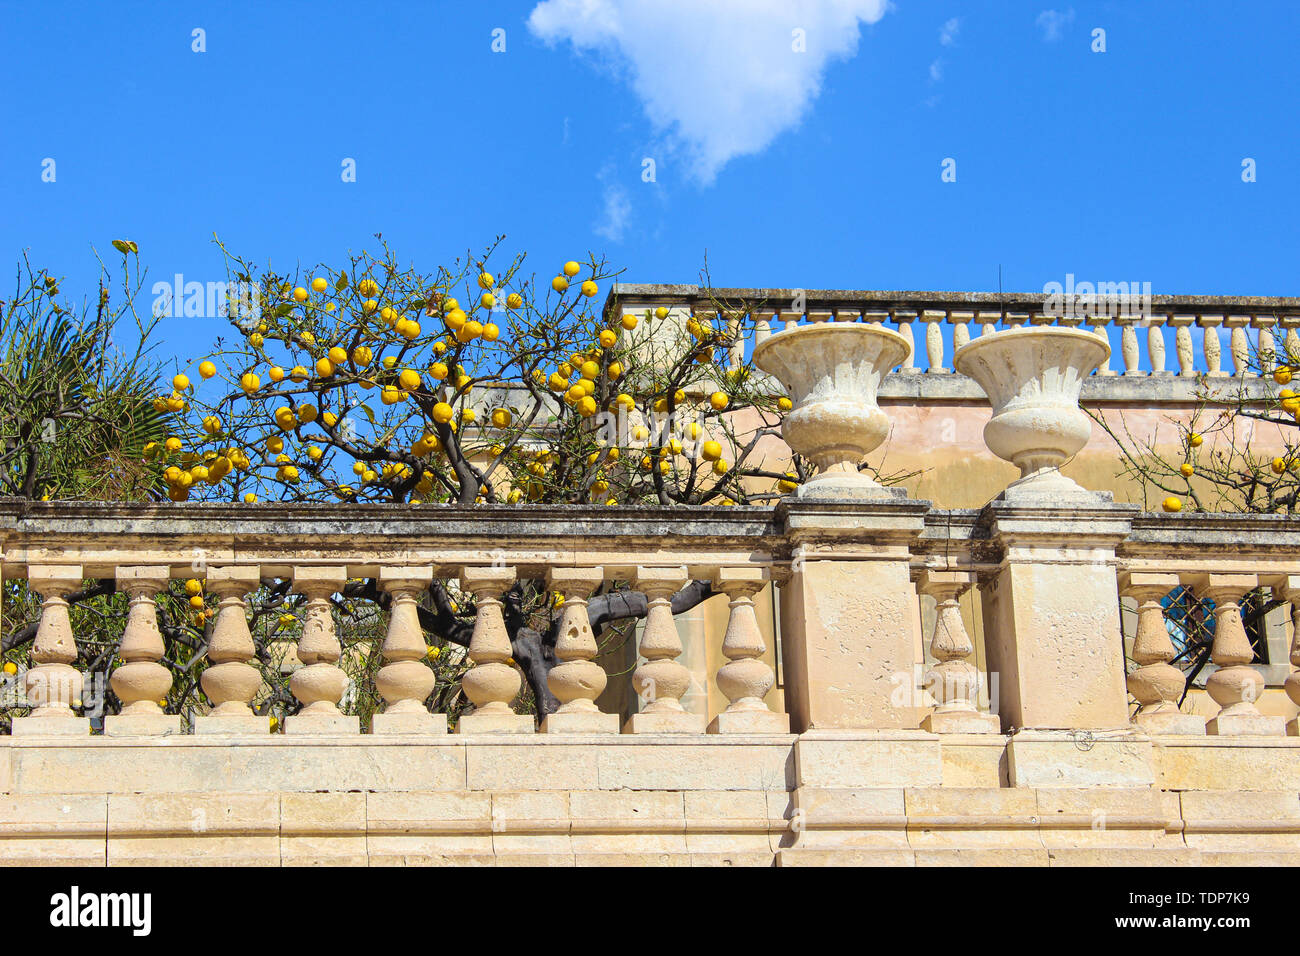 Lemon tree on historical terrace on Piazza Duomo Square in Syracuse, Sicily, Italy. The main historical square is located on famous Ortigia Island. Popular tourist attraction. Stock Photo